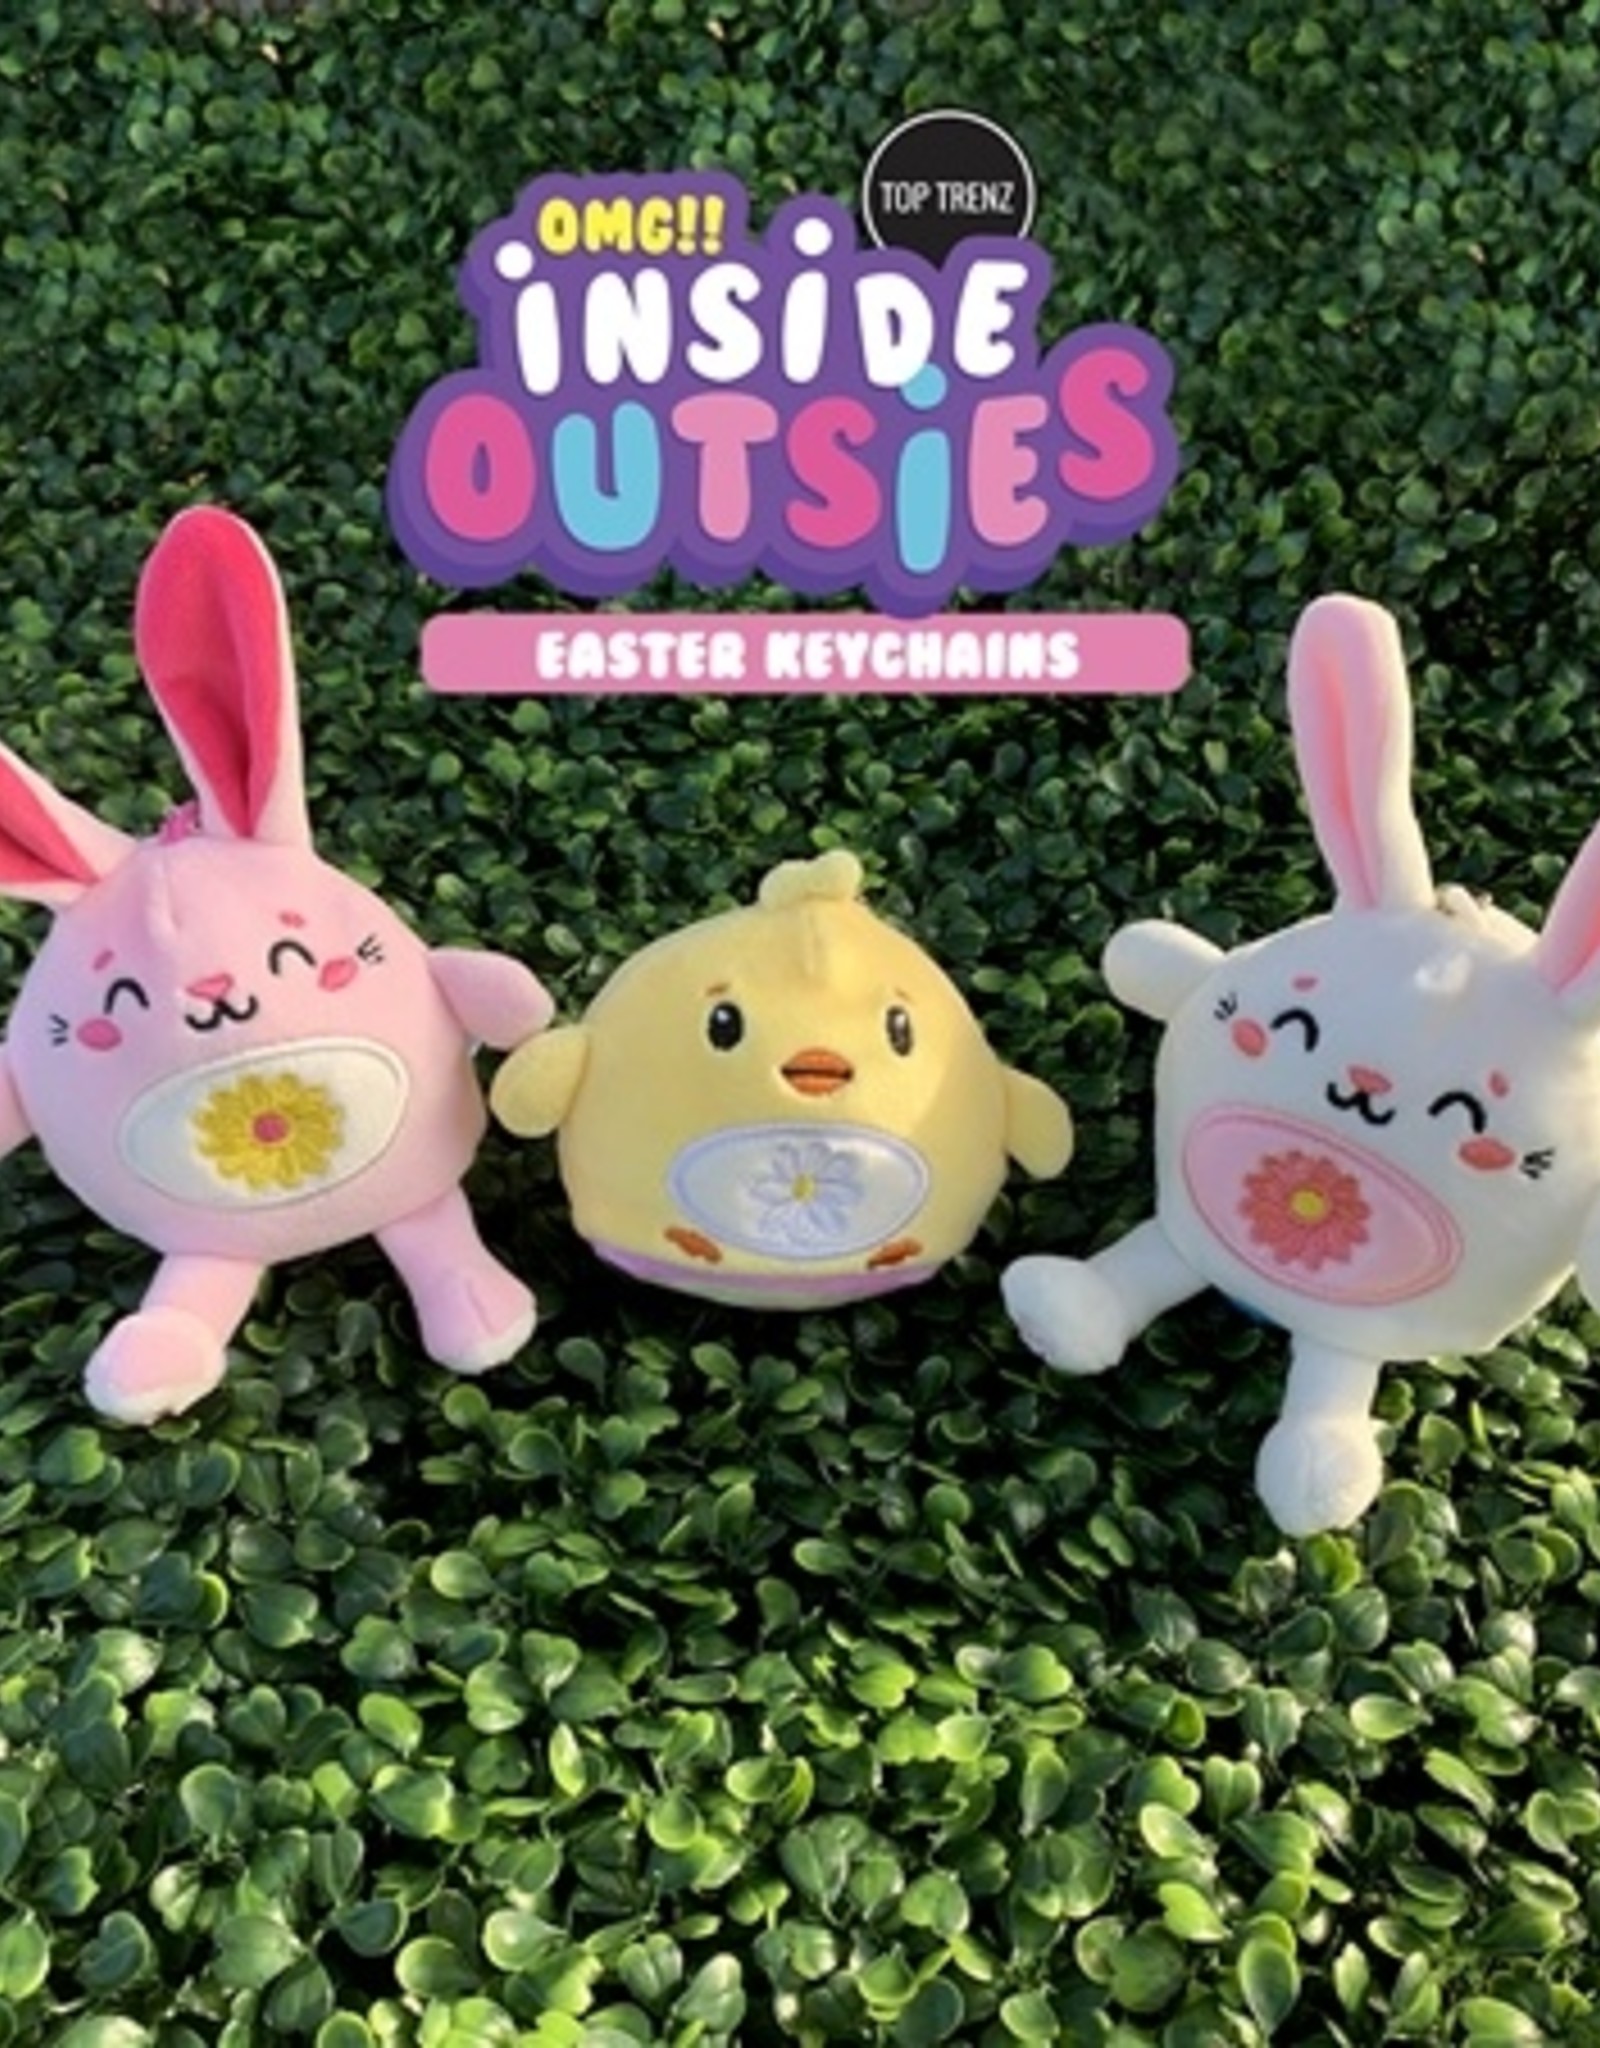 Top Trenz OMG Inside Outsies Reversible Plush Easter Collection, Assorted